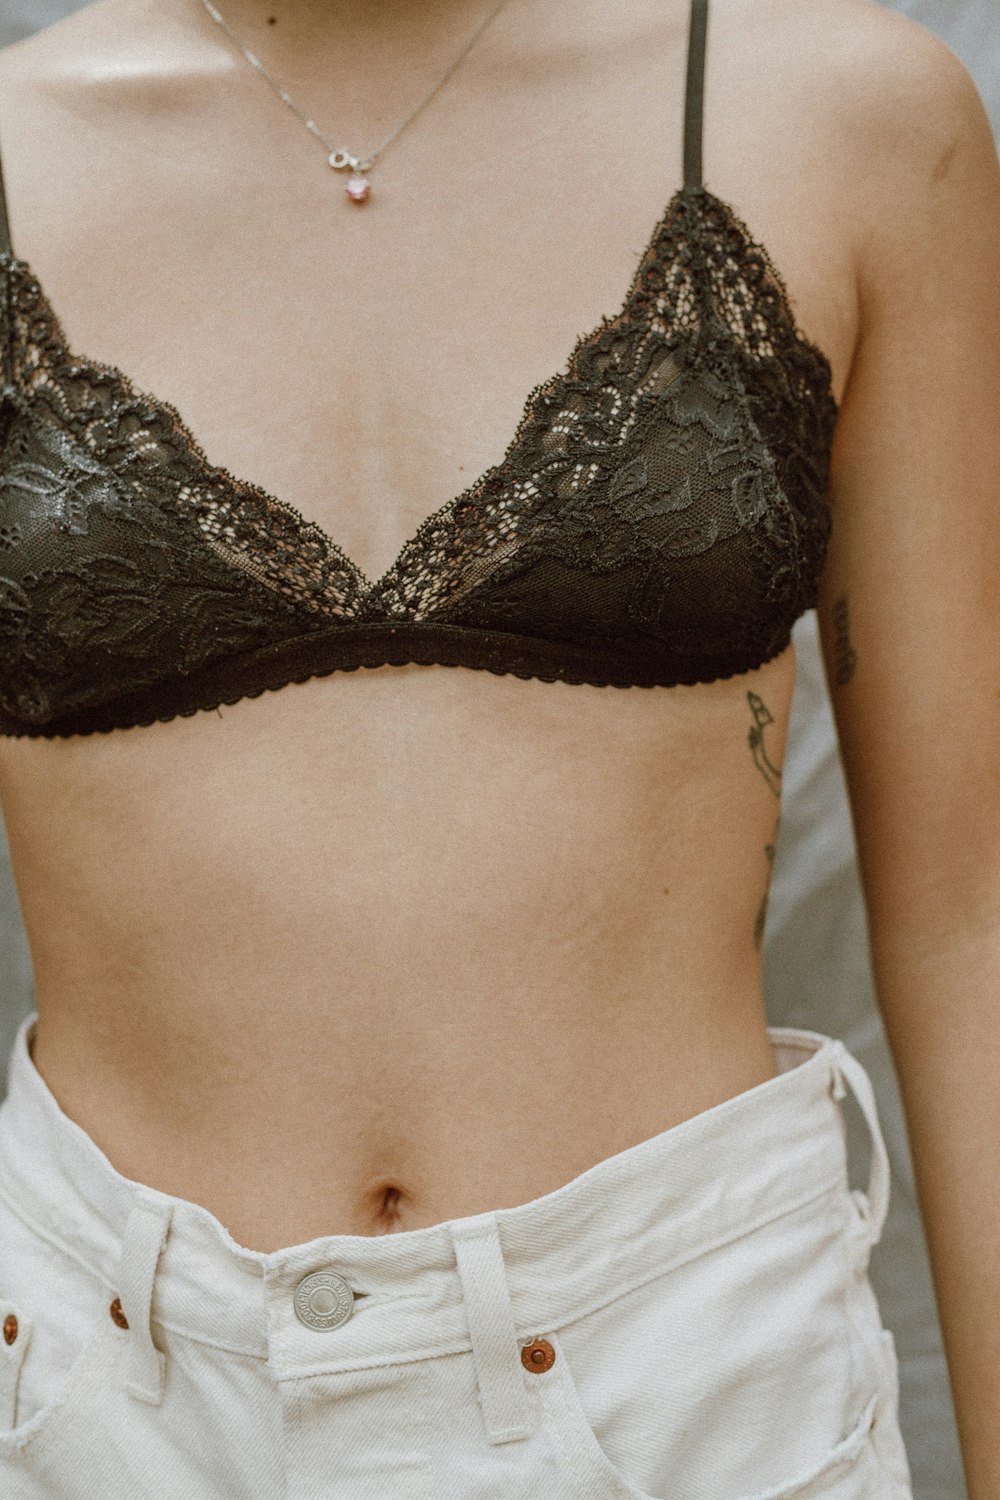 Woman in black lace brassiere and white skirt photo – Free Brown Image on  Unsplash